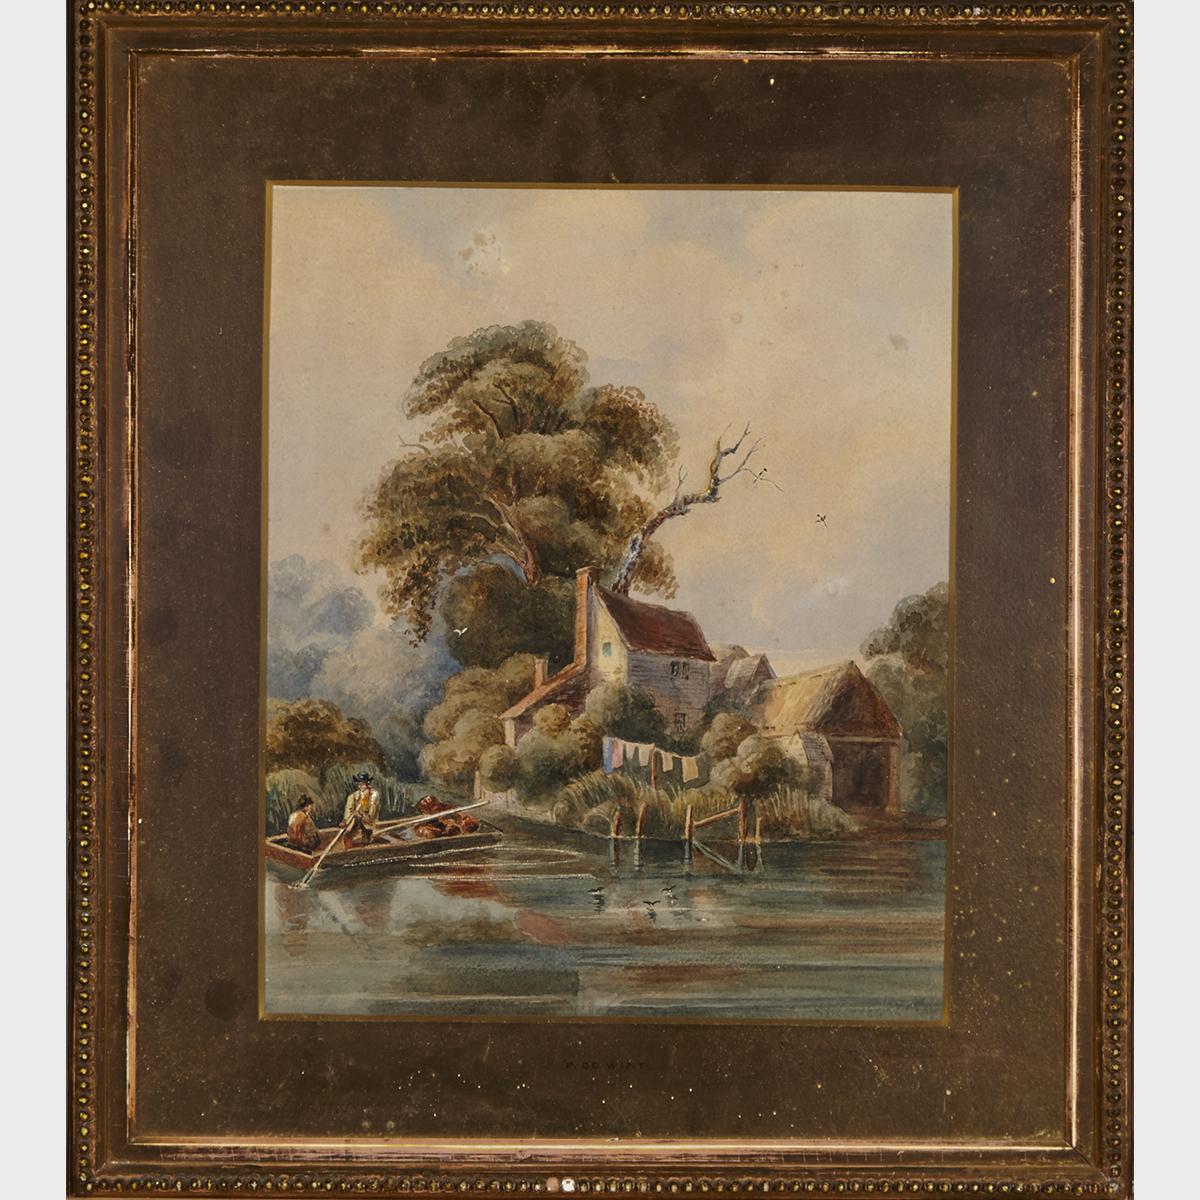 Attributed to Peter De Wint (1784-1849)